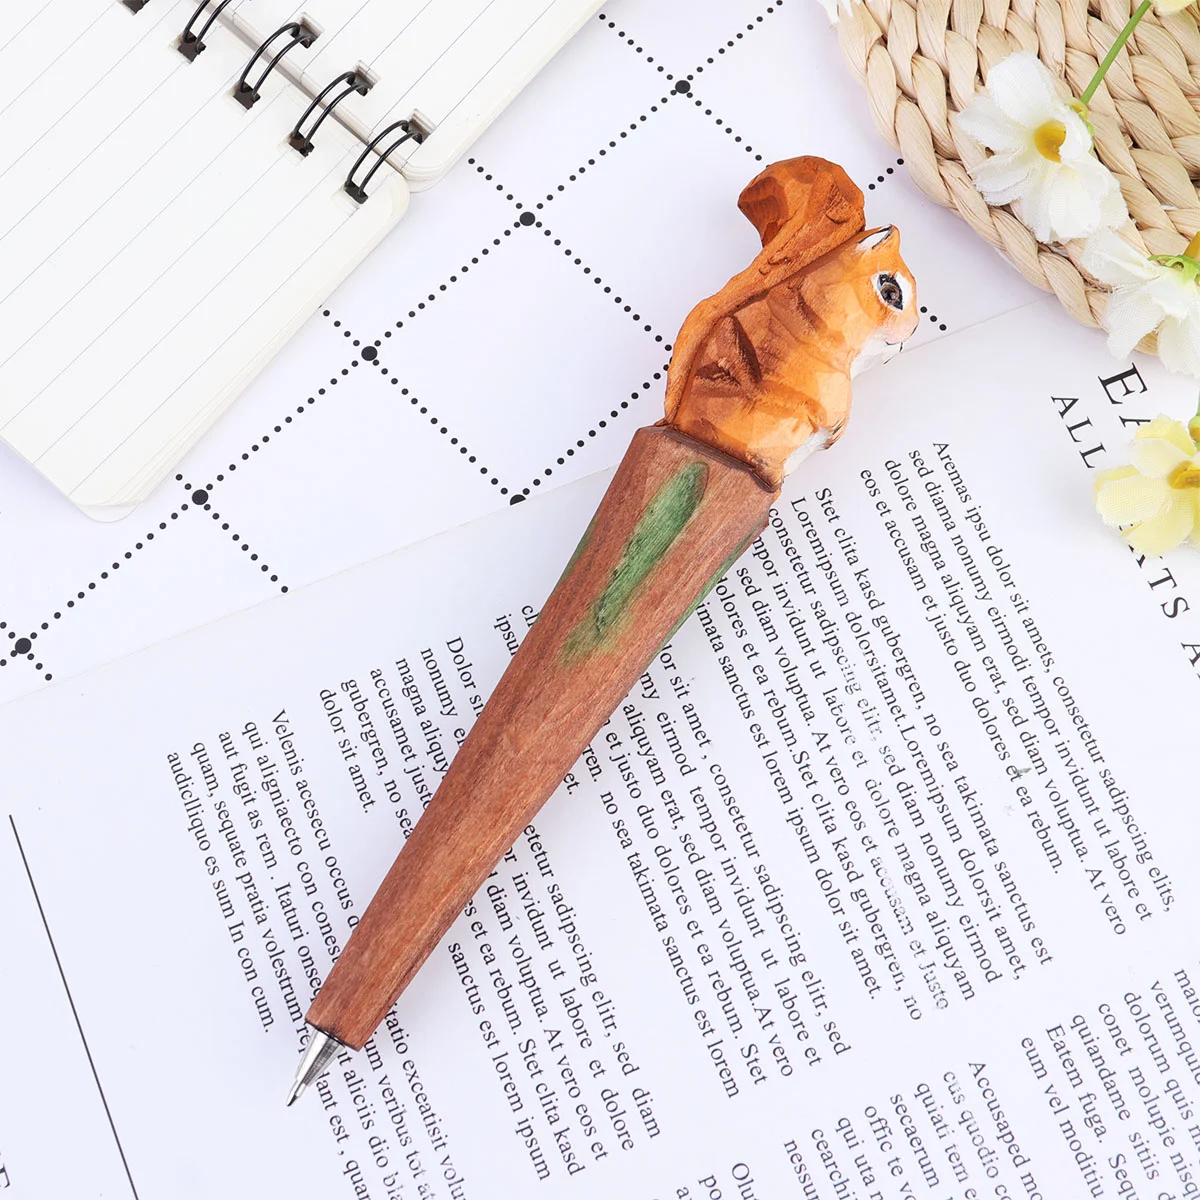 Pure Handmade Wood Carving Animal Pen Creative Wood Carving Squirrel Ballpoint Pen Replaceable Refill Gel Pen for Students pure bases скраб парфюмированный для тела wild strawberries and cashmere wood 250